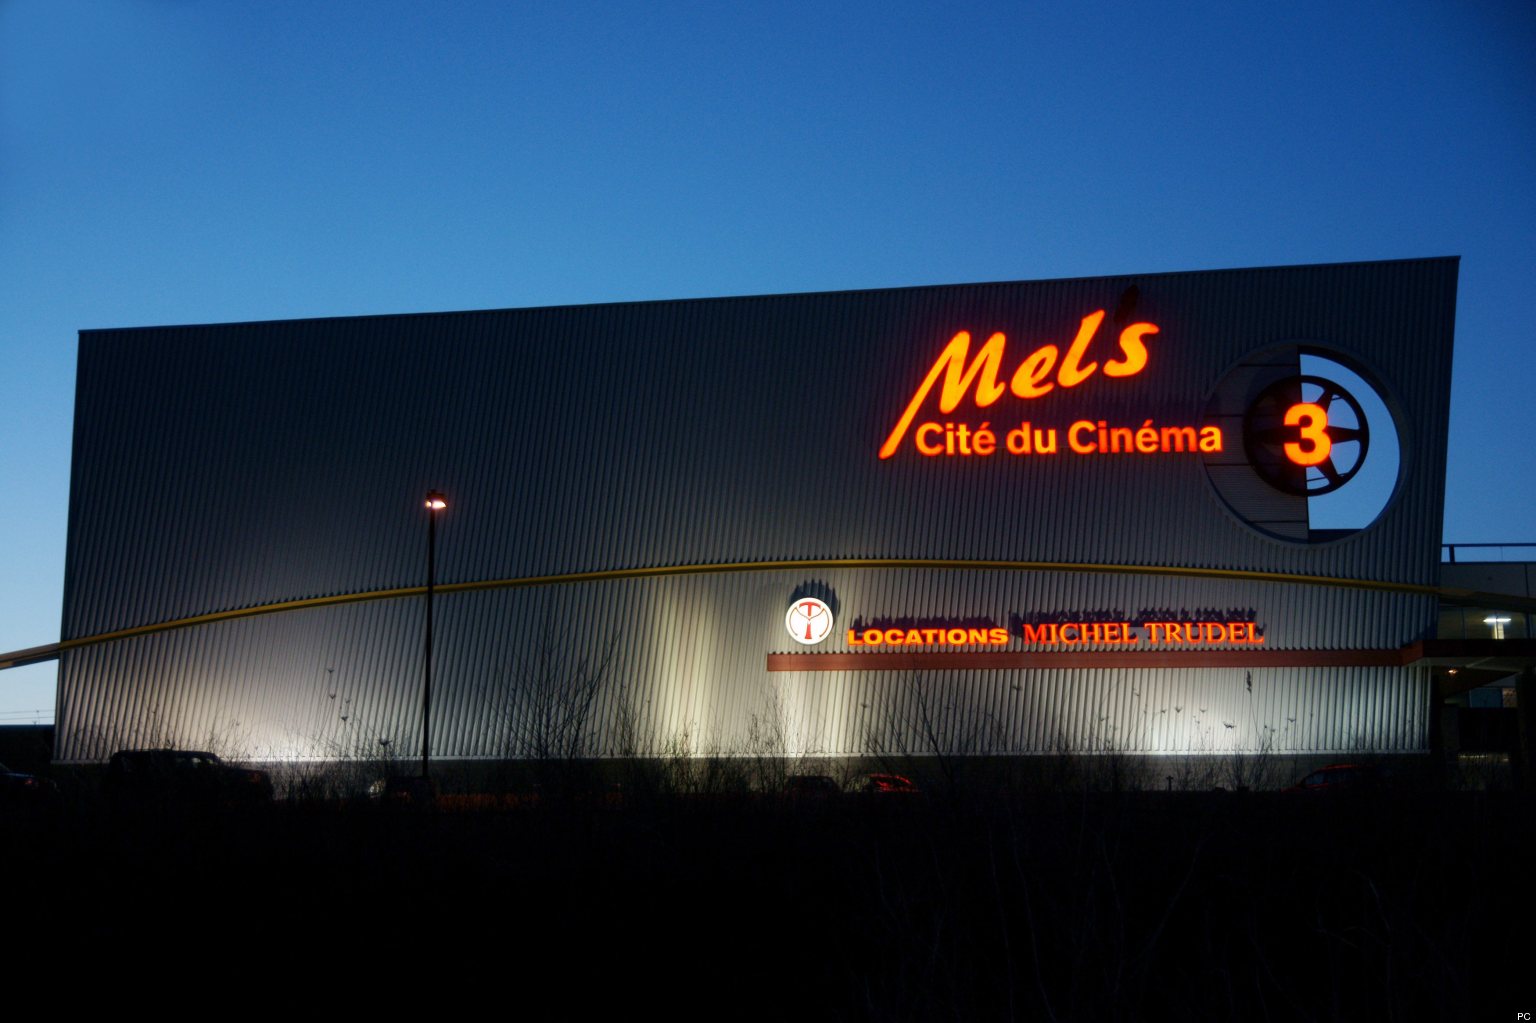 Mel's Cite du Cinema, in Montreal, one of 3 large soundstages for TV and film production. Mario Beauregard/CPI/The Canadian Press